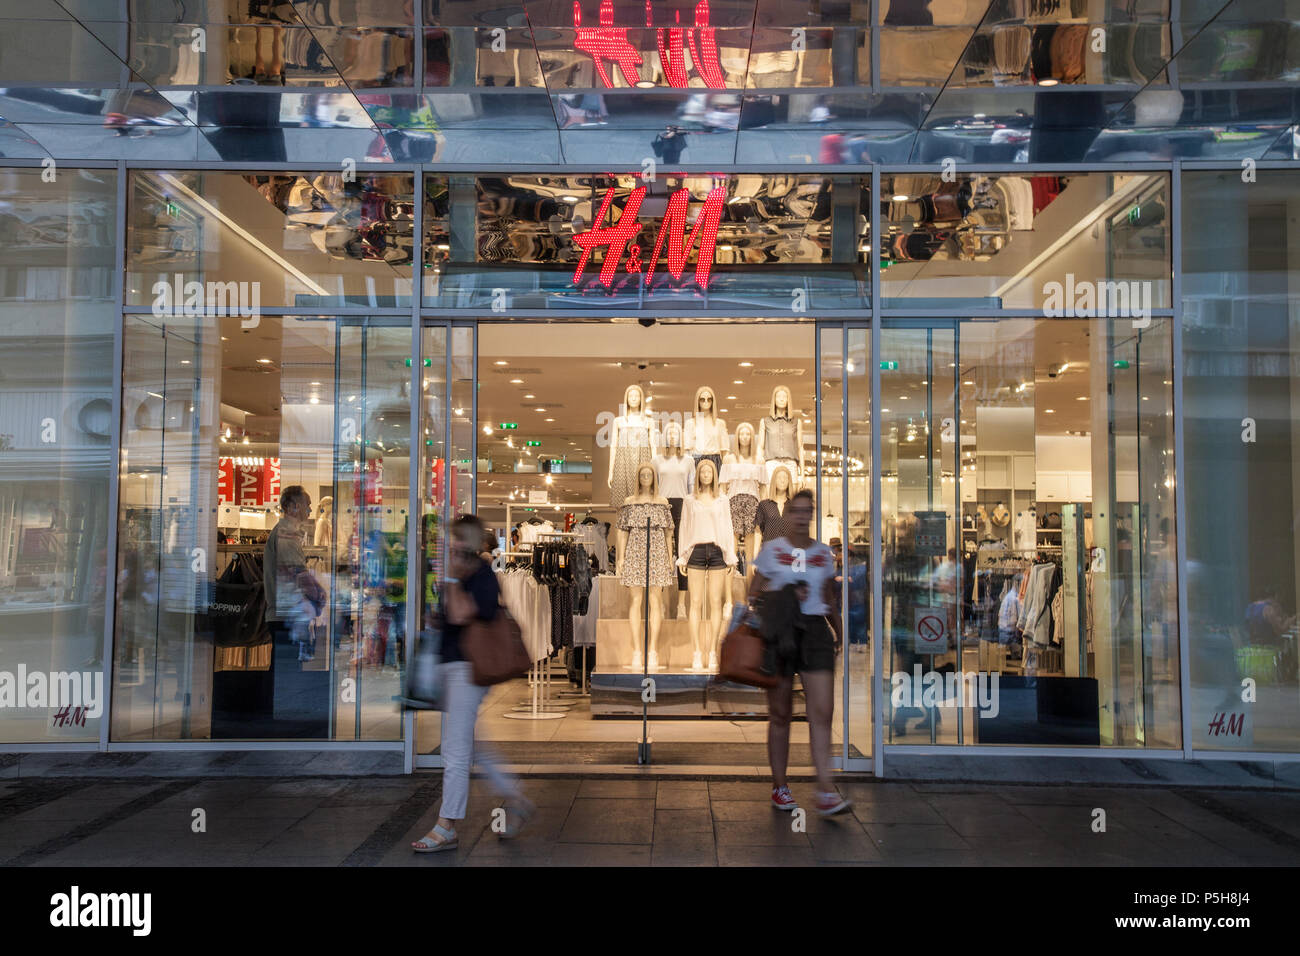 BELGRADE, SERBIA - APRIL 14, 2018:  Clients going outof an H&M store in the Serbian capital city, a giant logo of H&M can be seen above the main entra Stock Photo